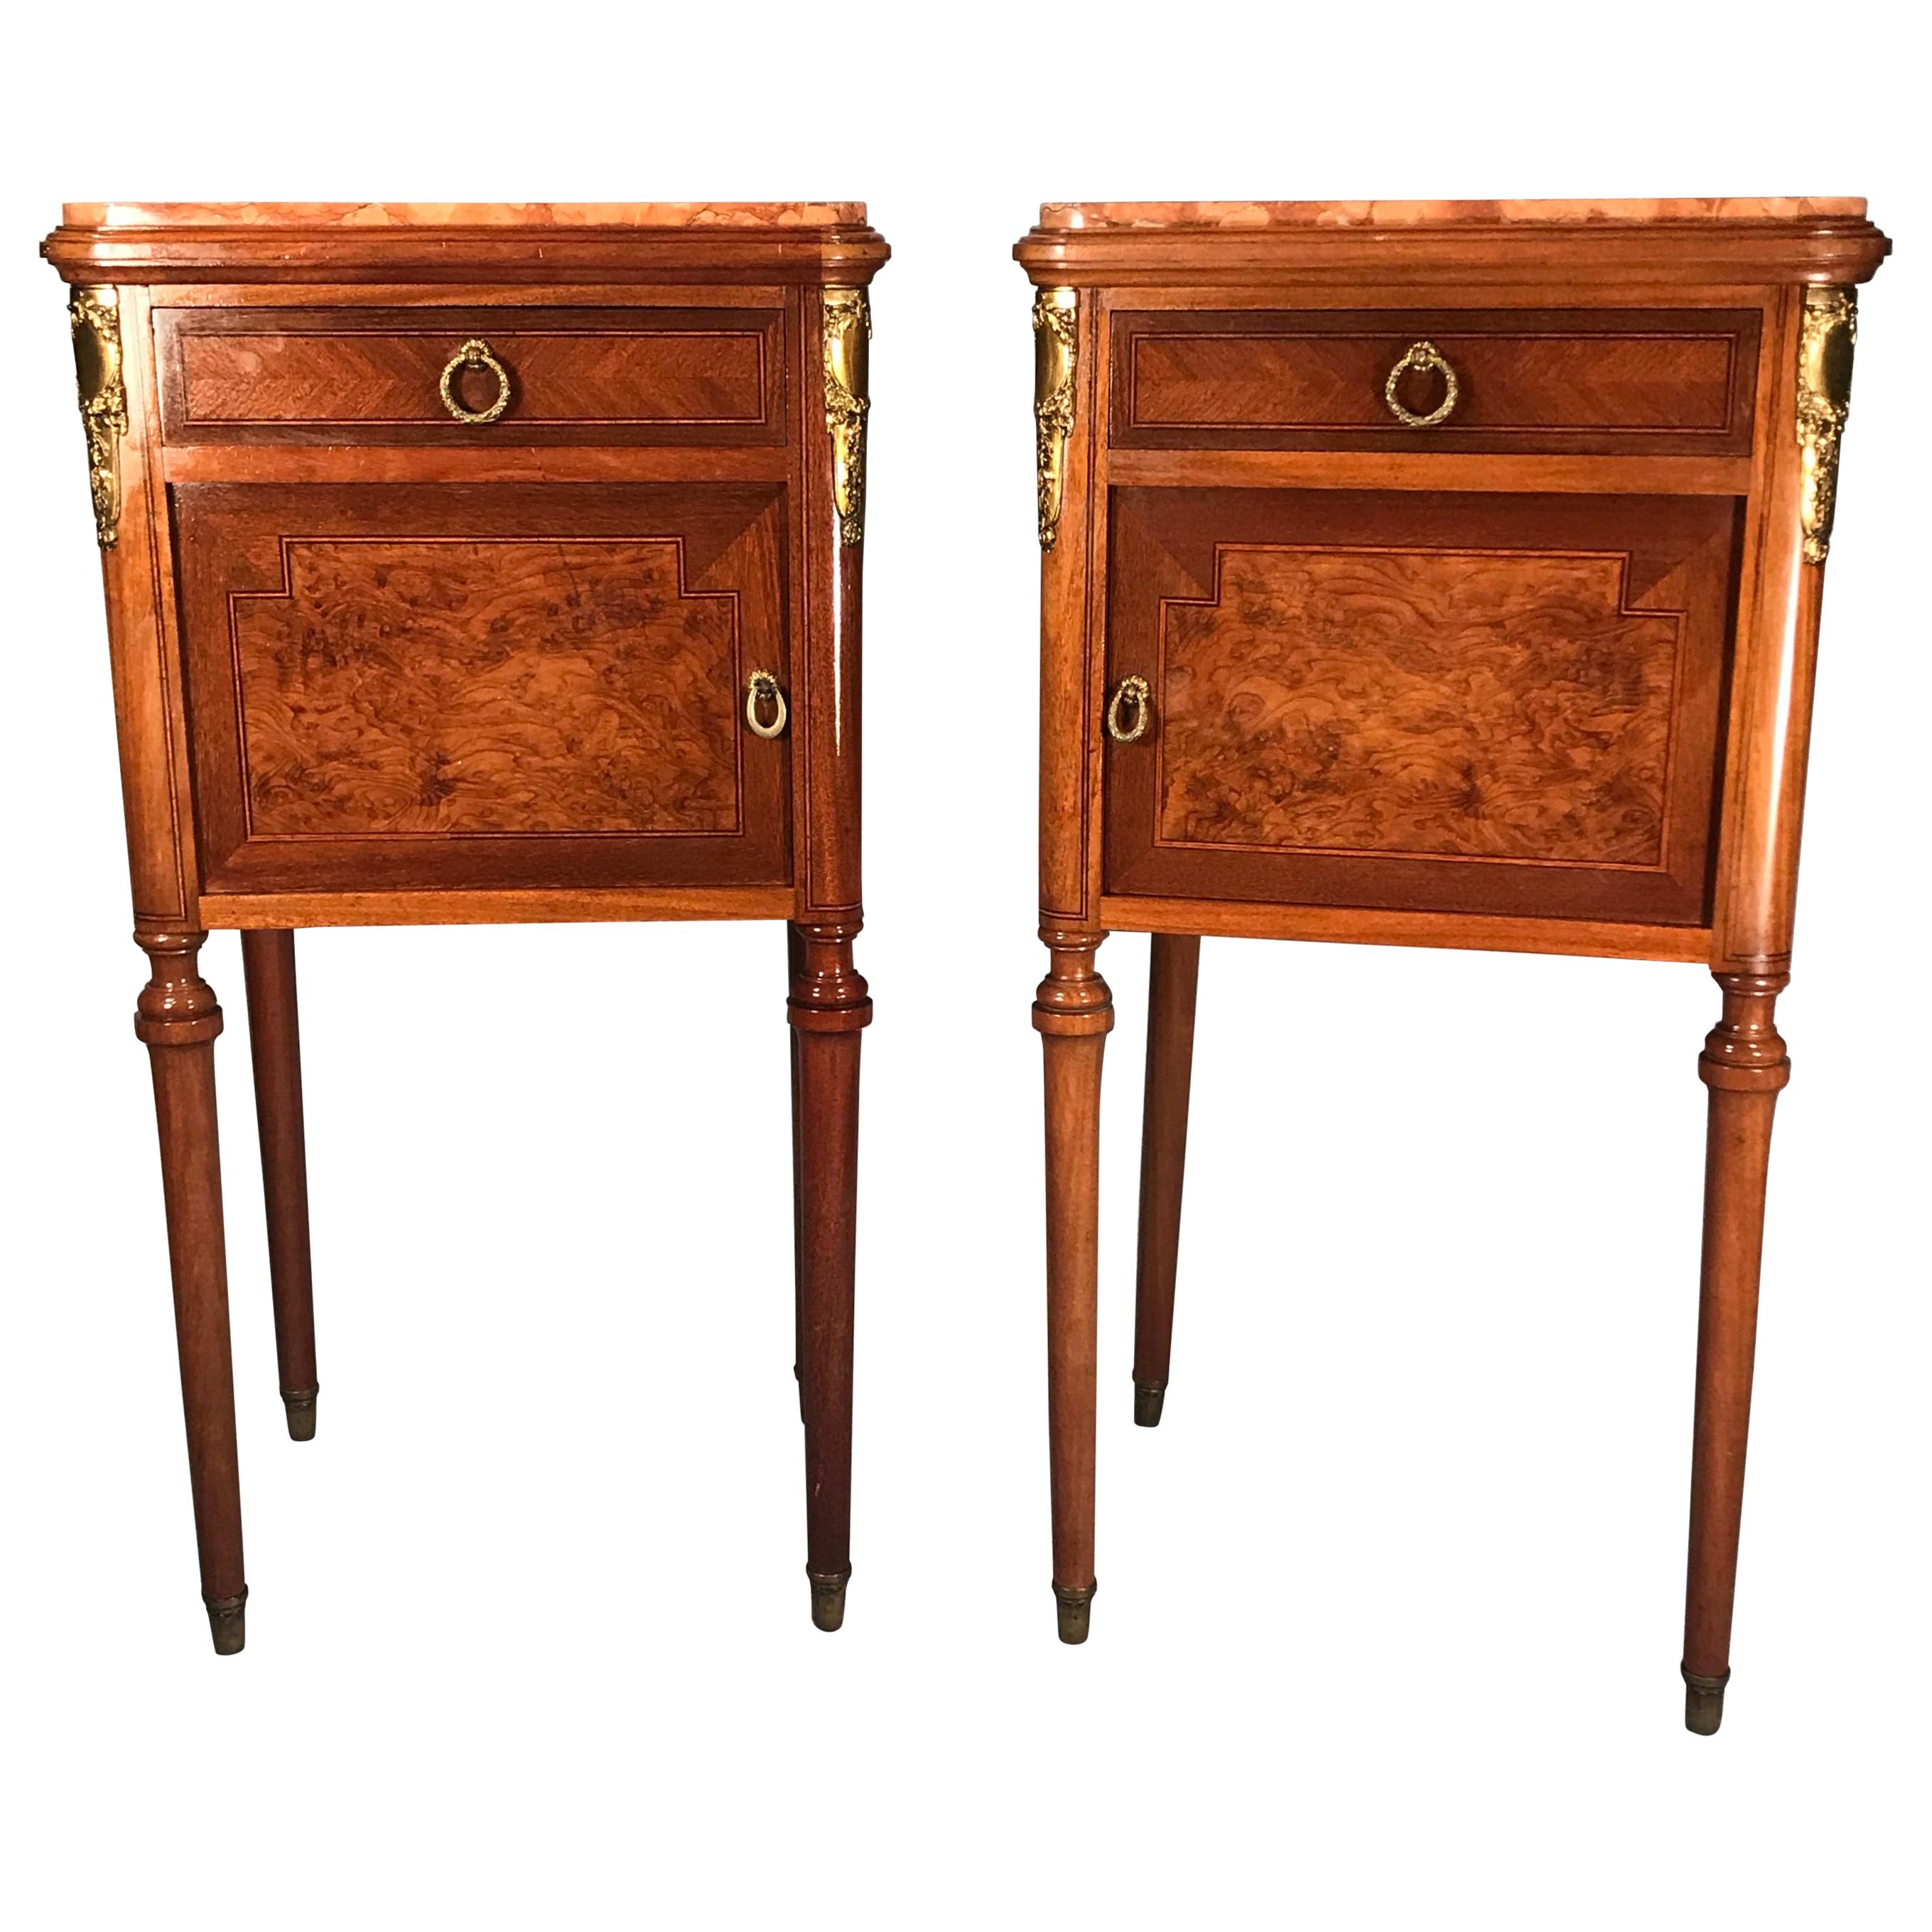 Pair of Nightstands, Early Art Nouveau Style, France, 19th century